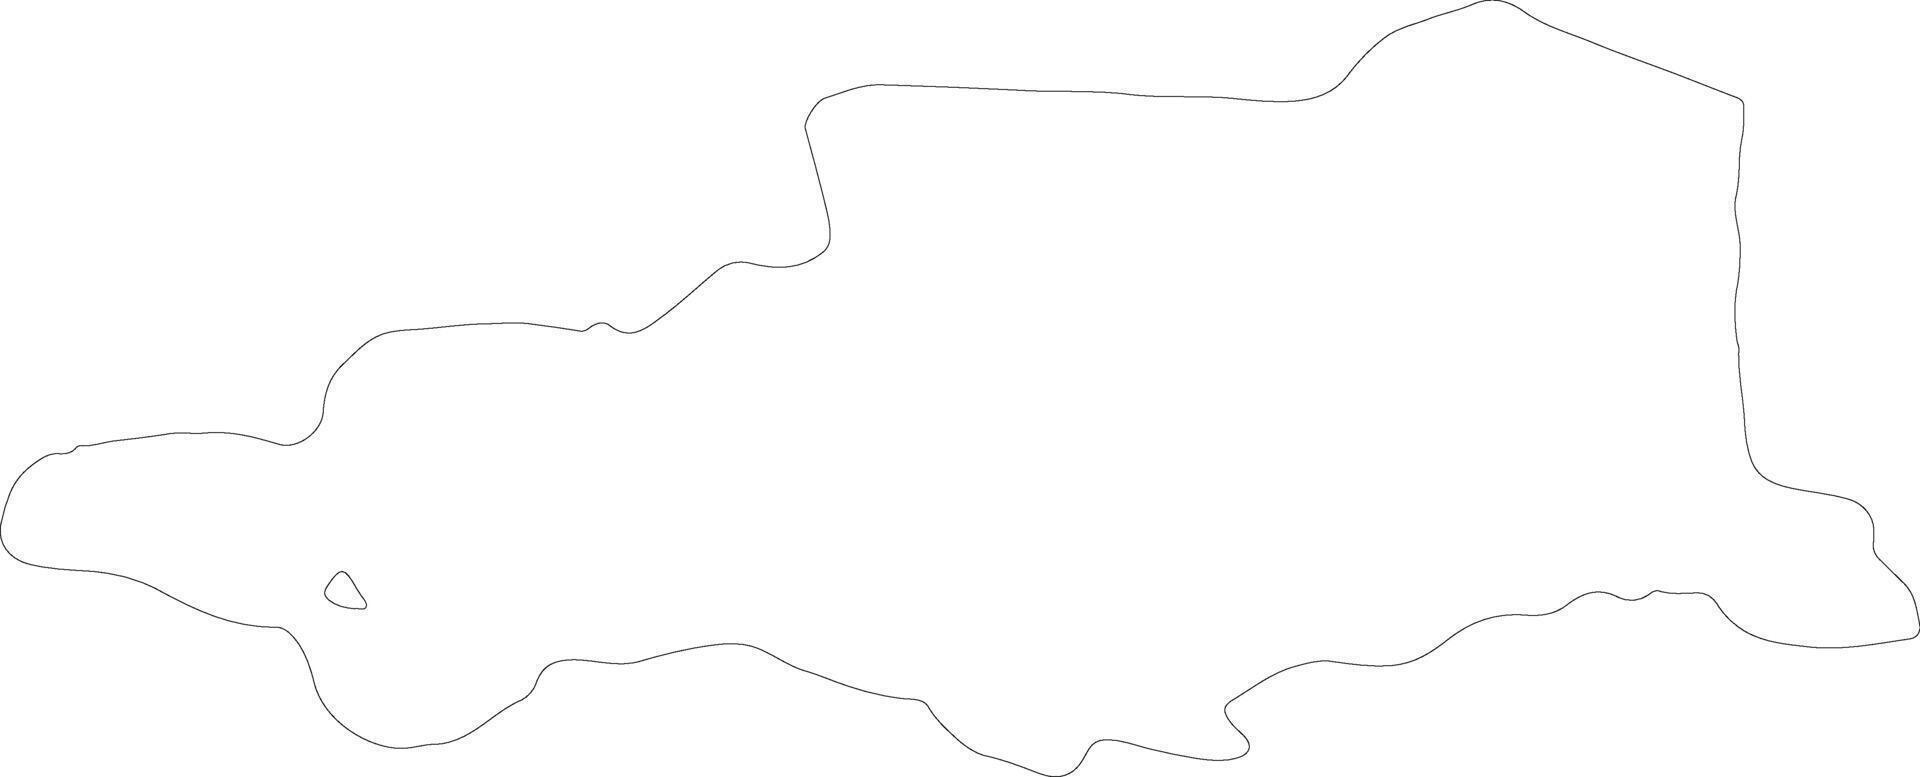 Pyrenees-Orientales France outline map vector